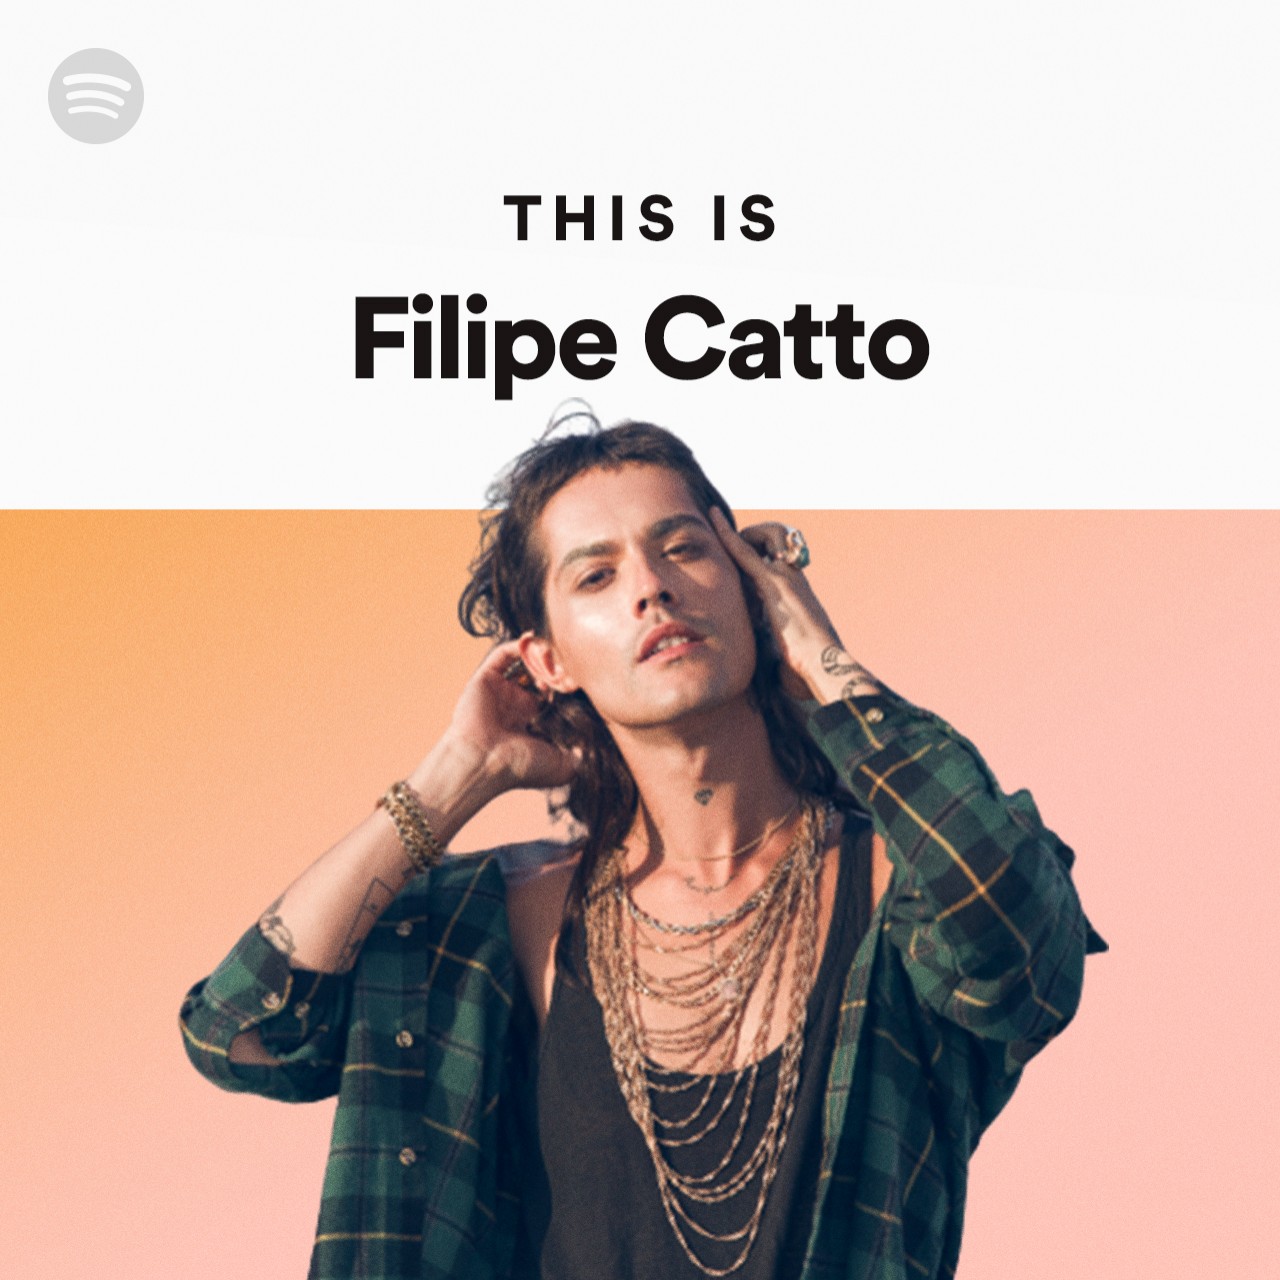 This Is Filipe Catto